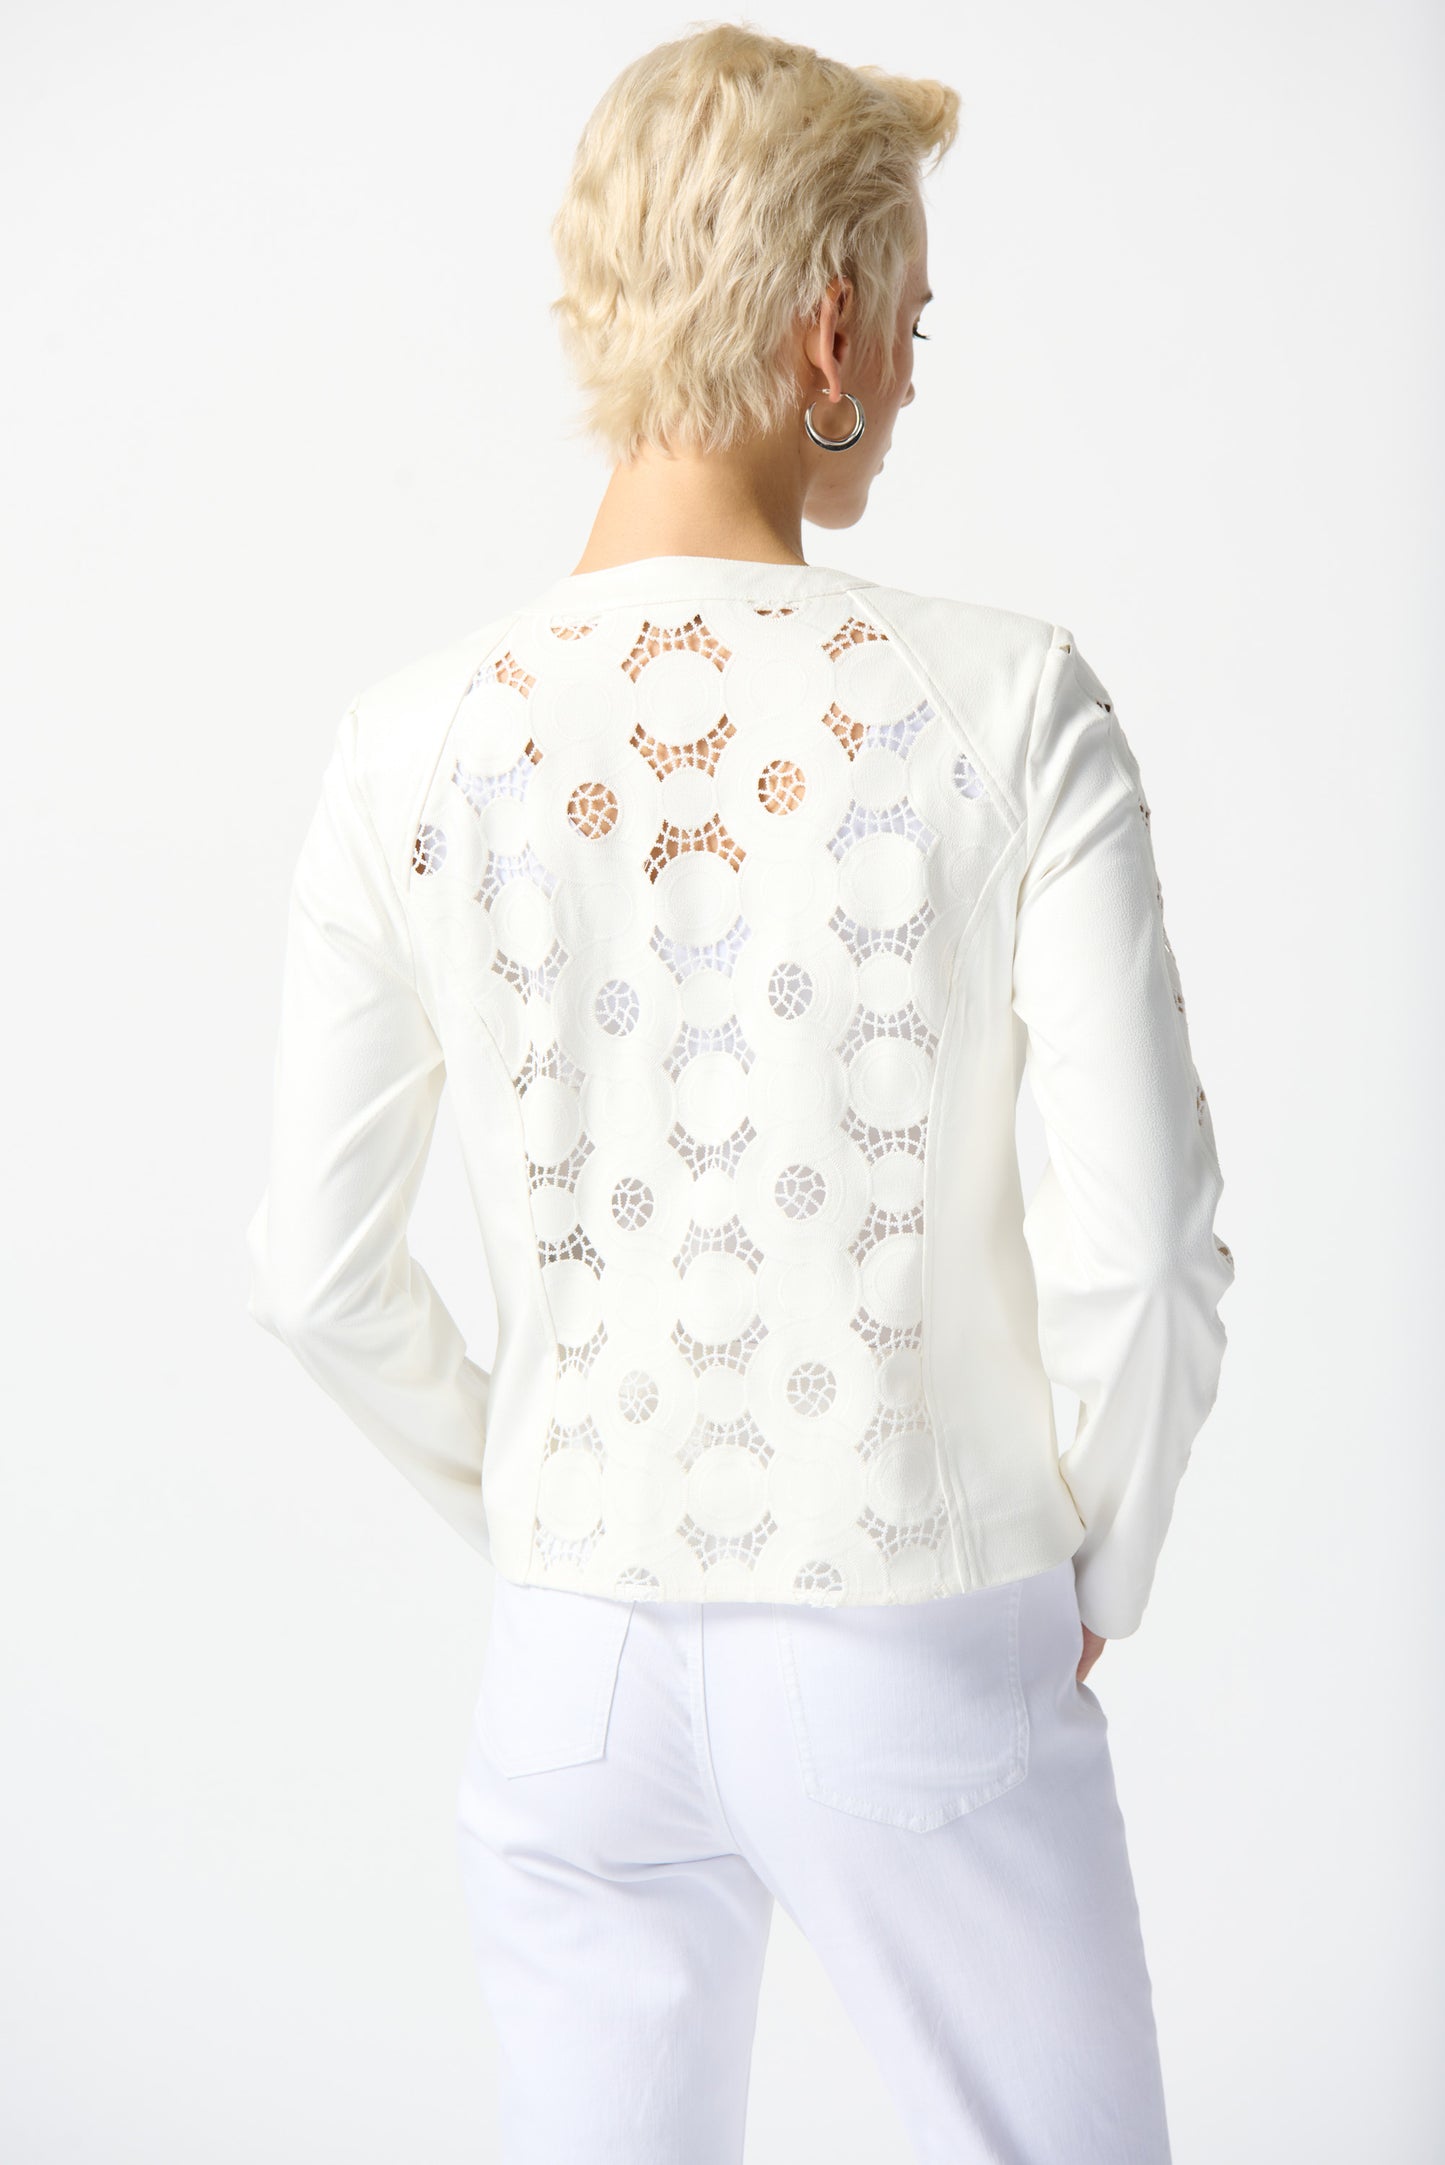 Joseph Ribkoff - Foiled Suede Jacket With Laser Cut Leatherette